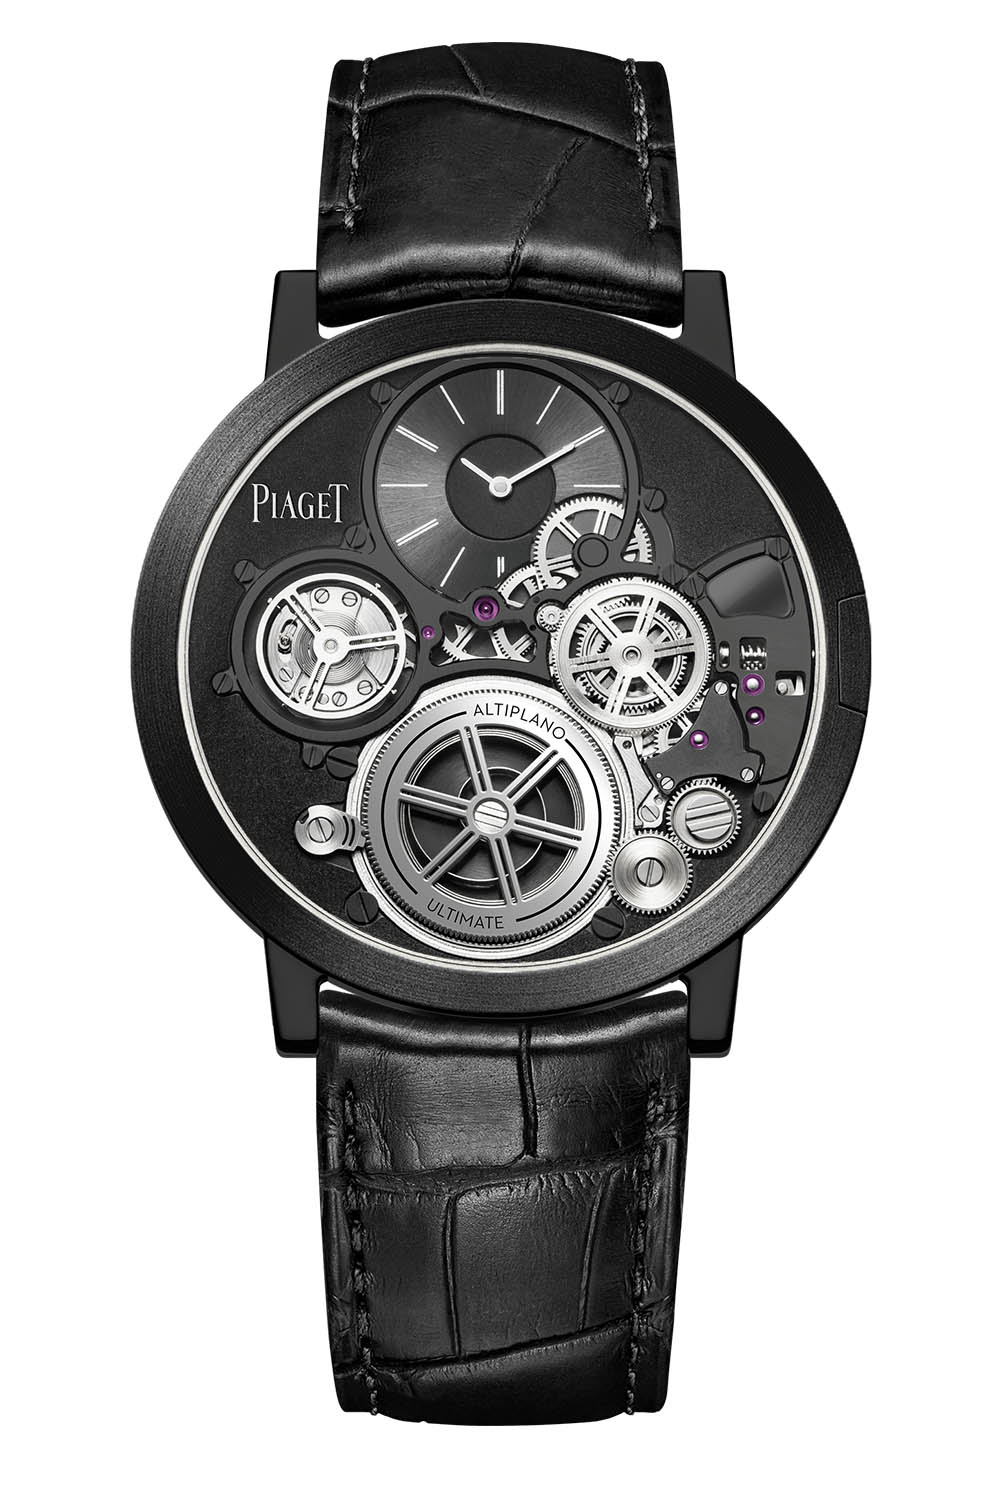 Piaget Altiplano Ultimate Concept 2020 - 5